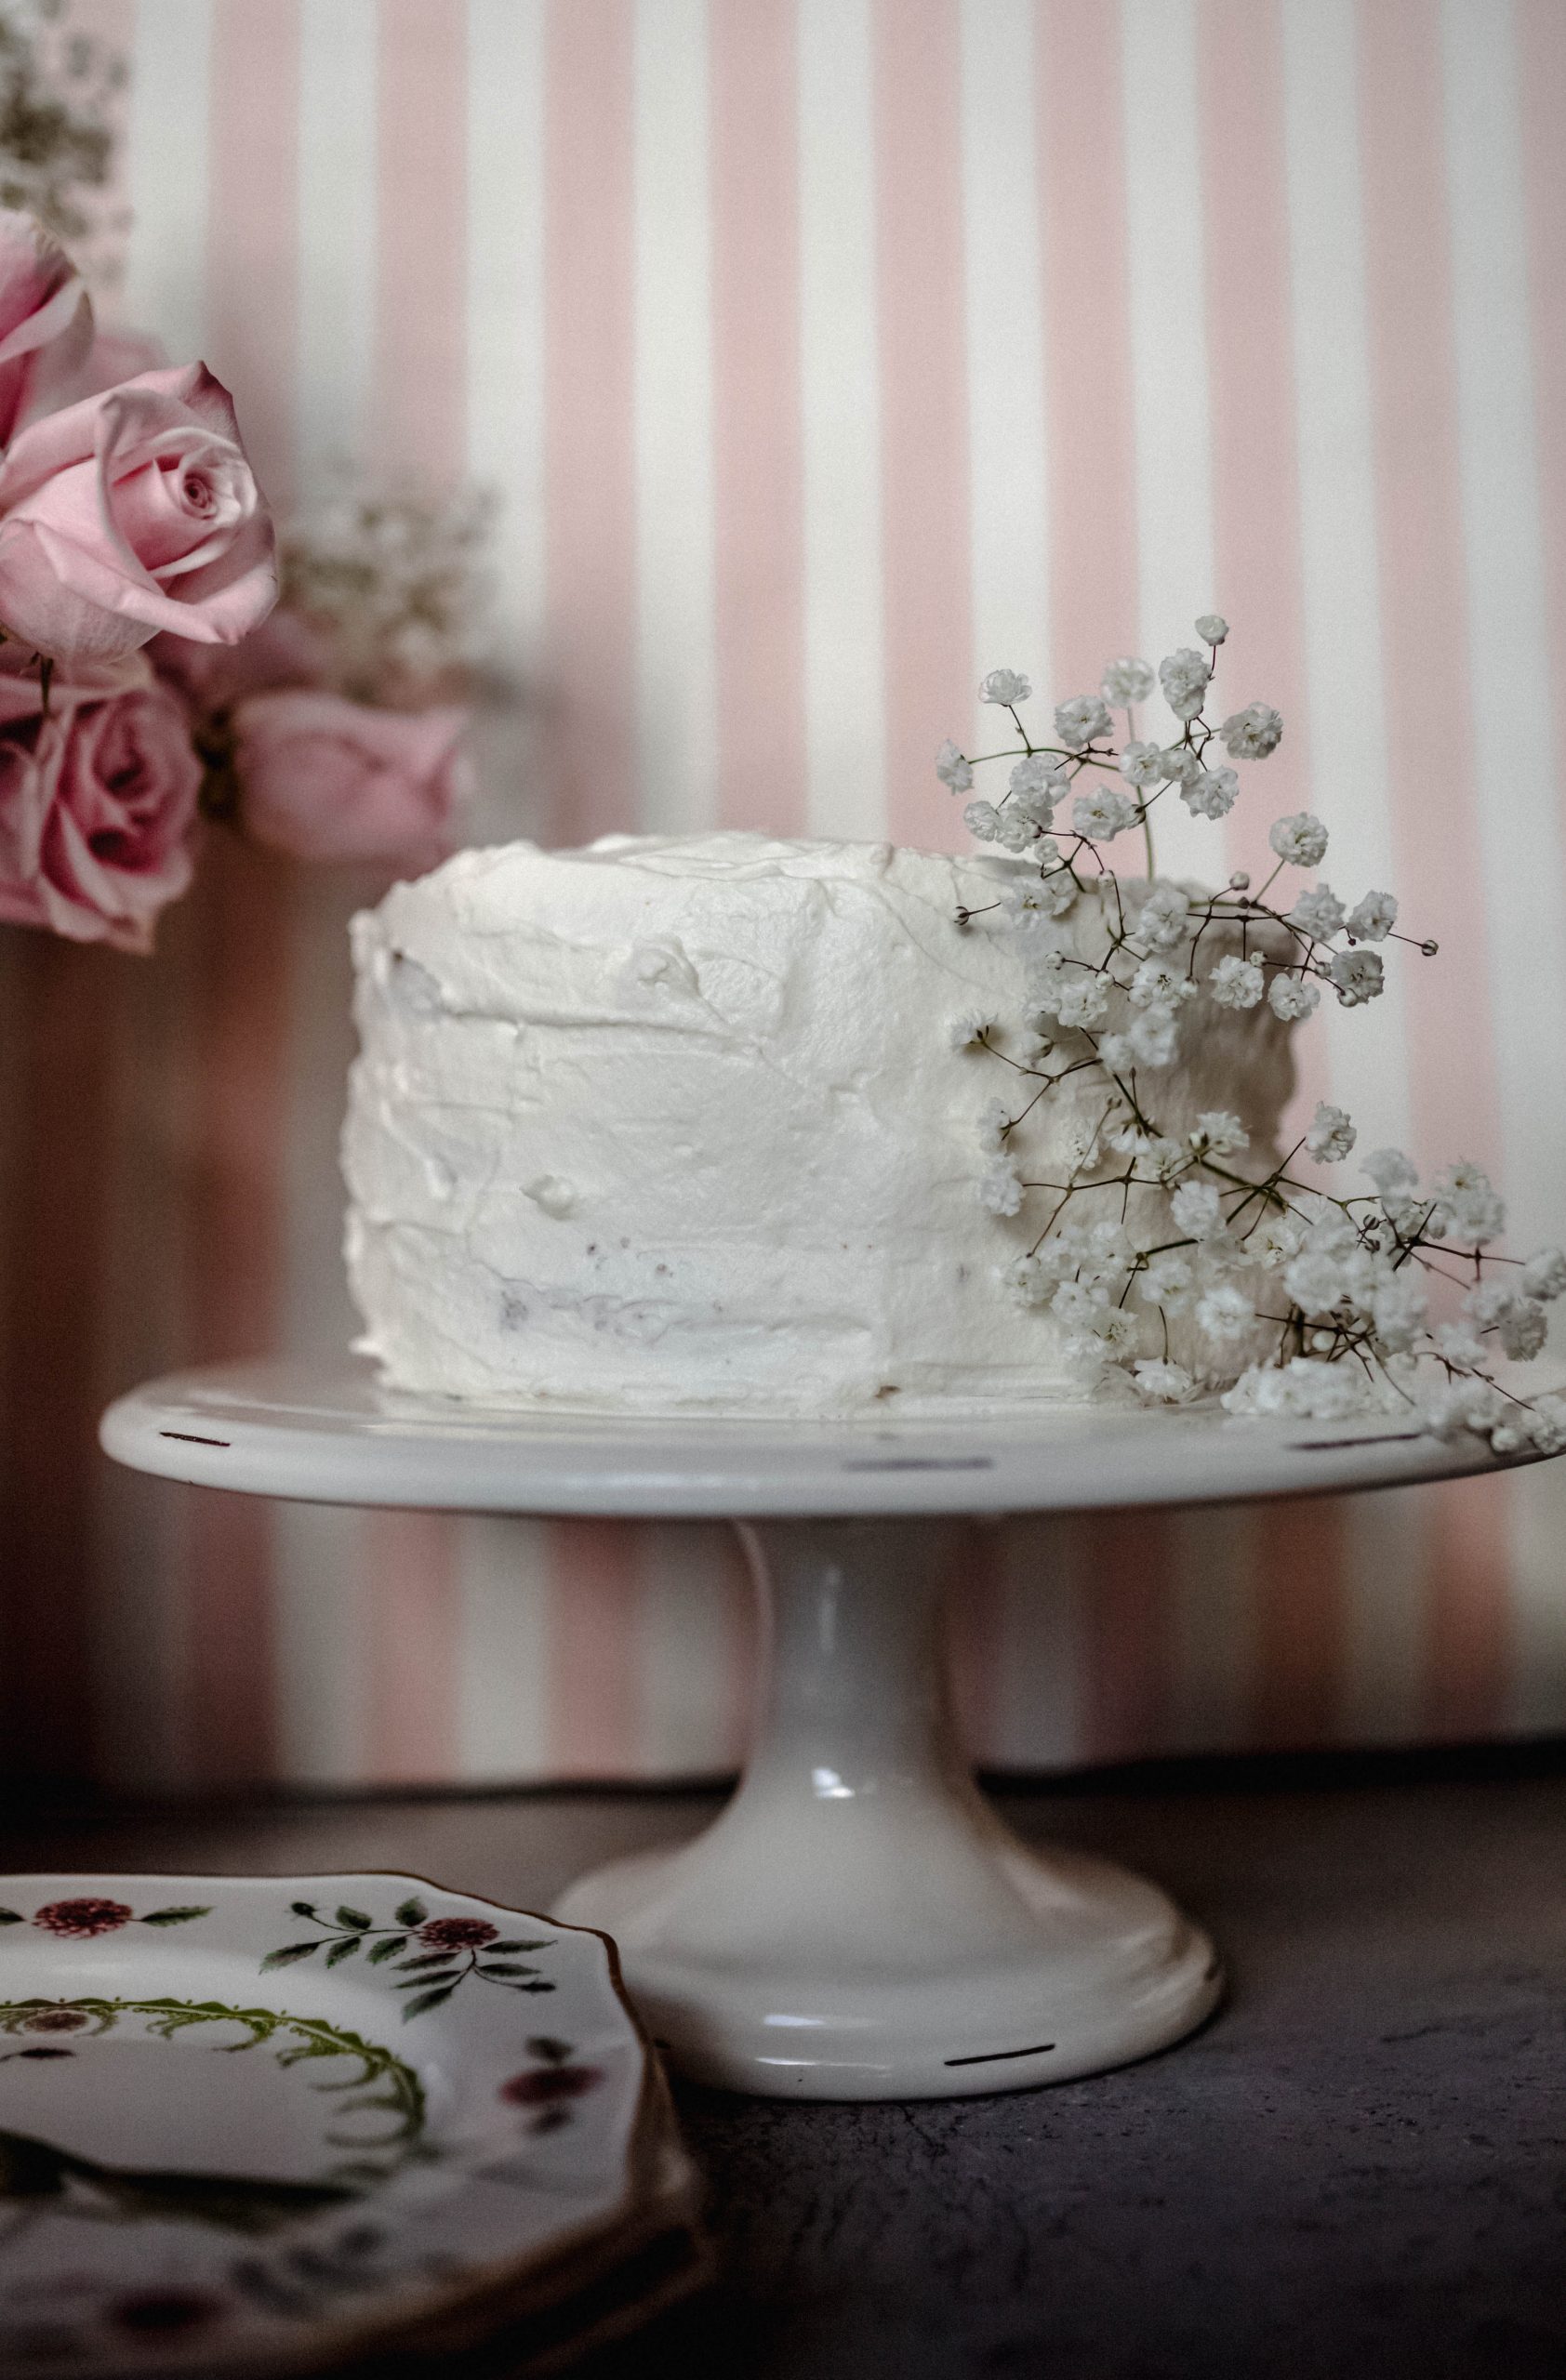 How to make a champagne cake with whipped cream frosting